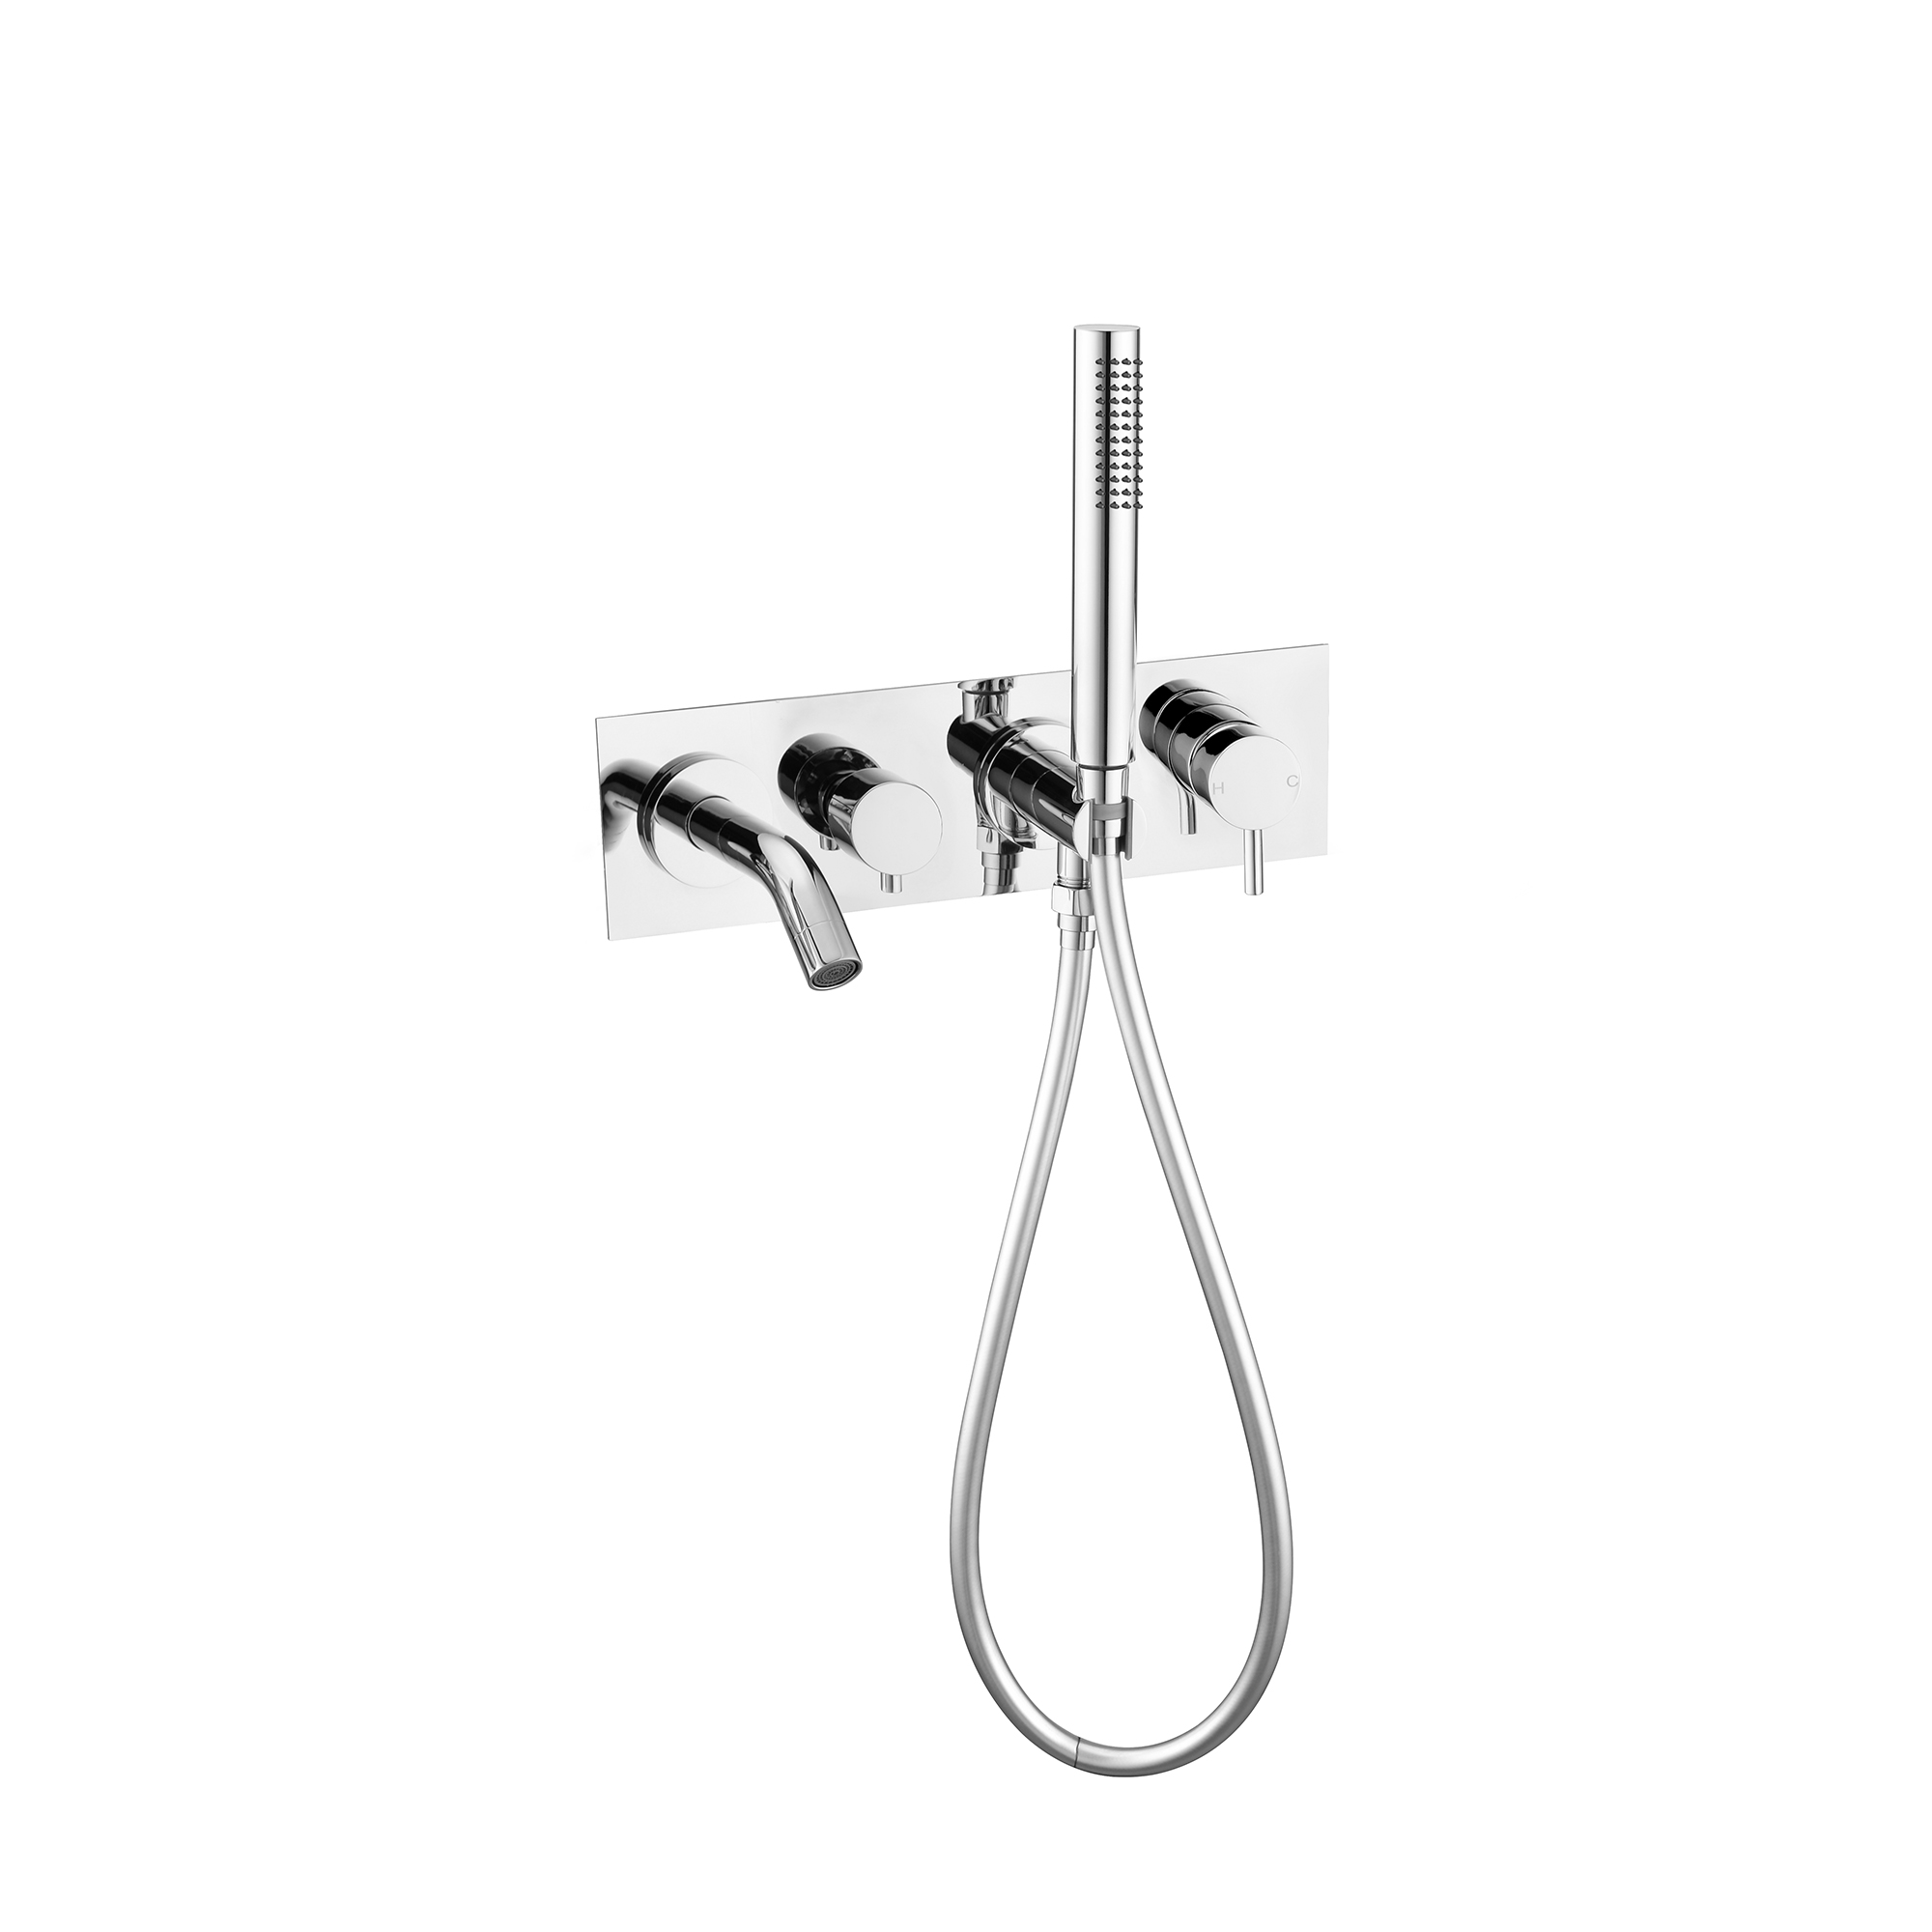 Nero Mecca Wall Mount Bath Mixer with Hand Shower - Chrome